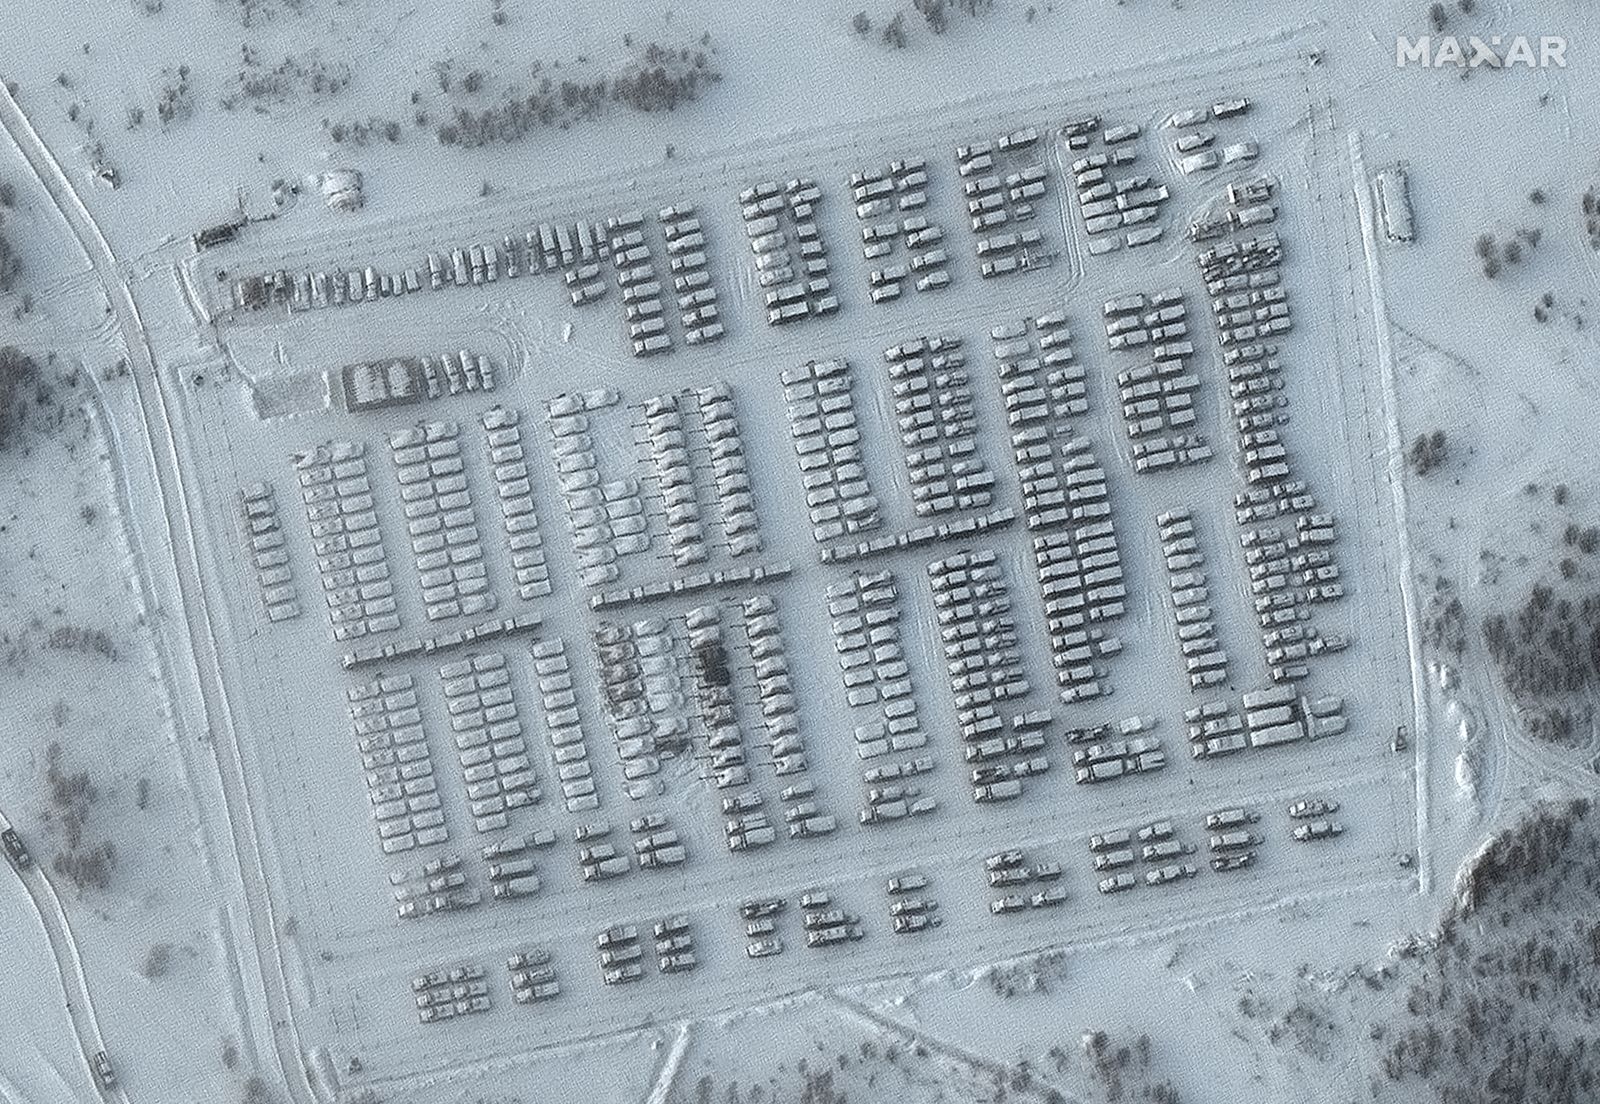 A closer view of military vehicles in Yelnya, Russia is seen in this Maxar satellite image taken on January 19, 2022 - via REUTERS